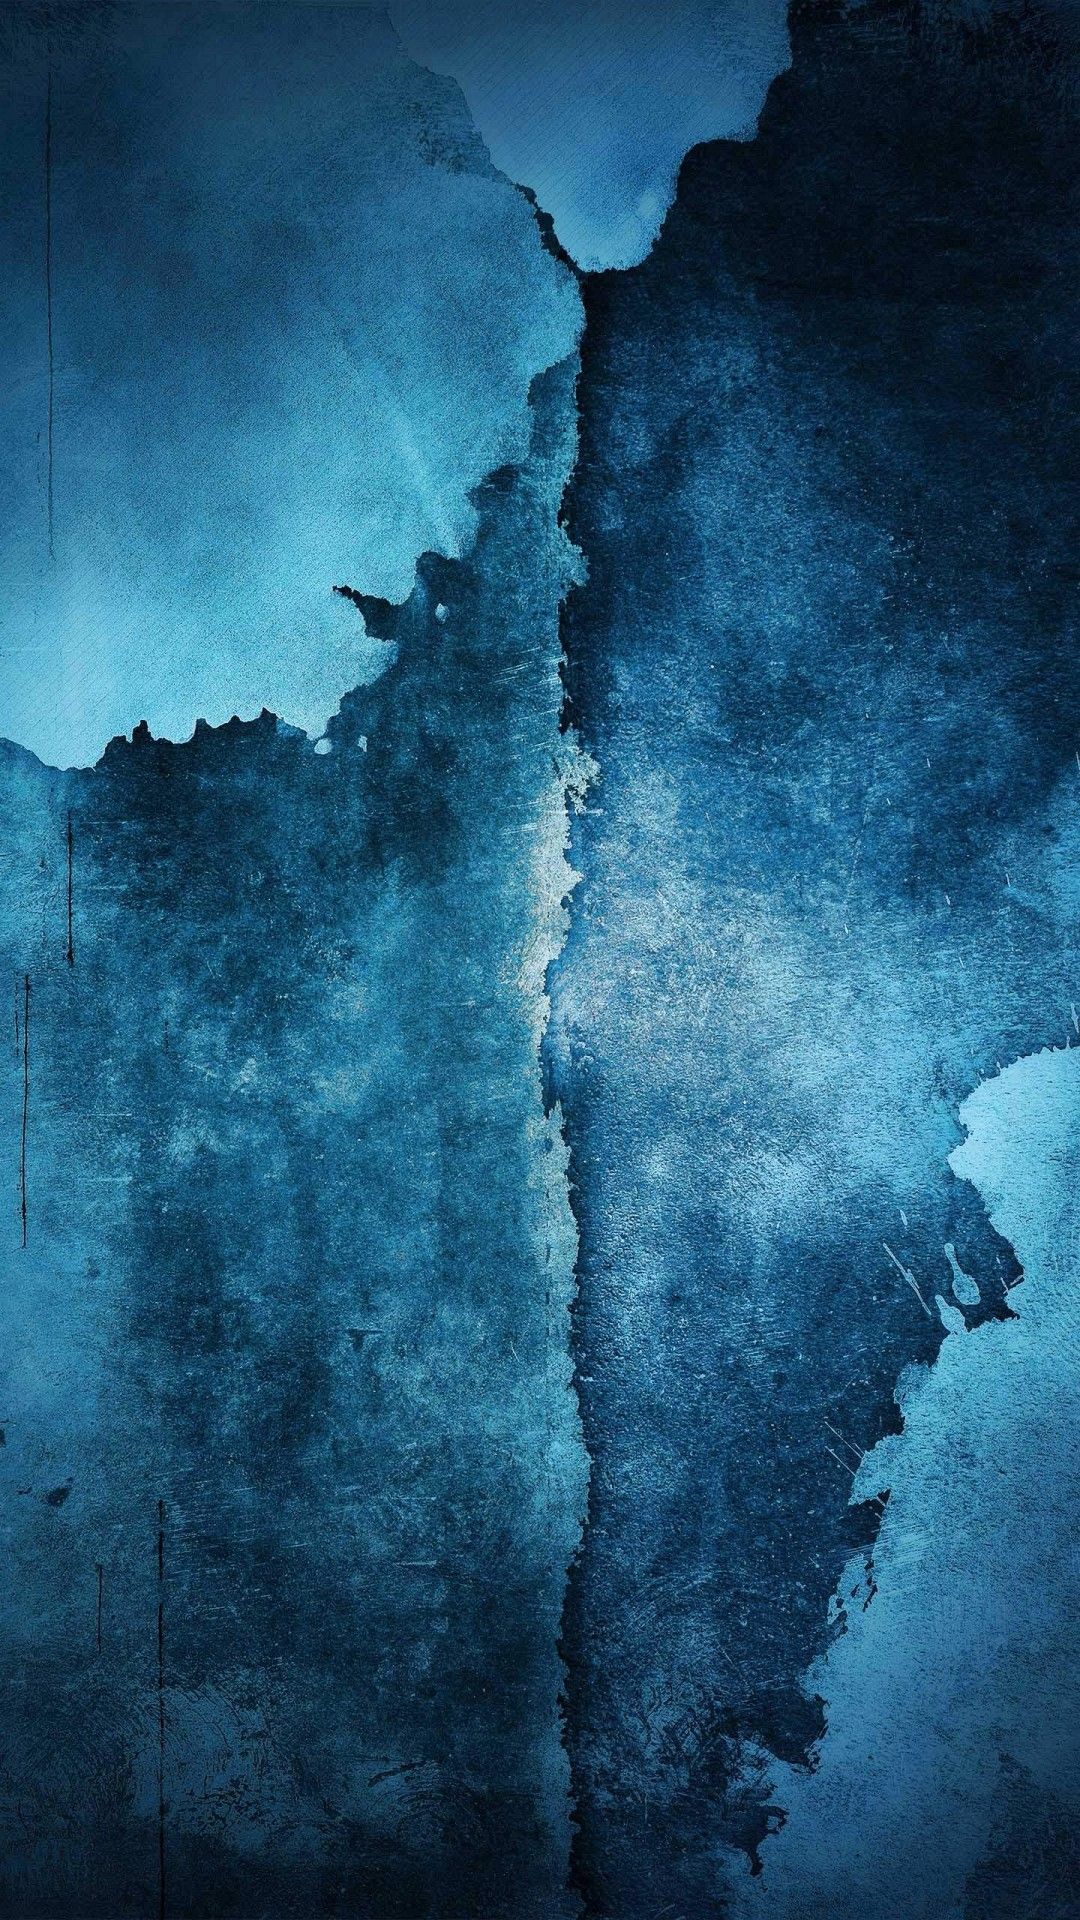 Wallpaper Iphone 6 Plus Wall Blue 5 5 Inches - 1080 x 1920 ...